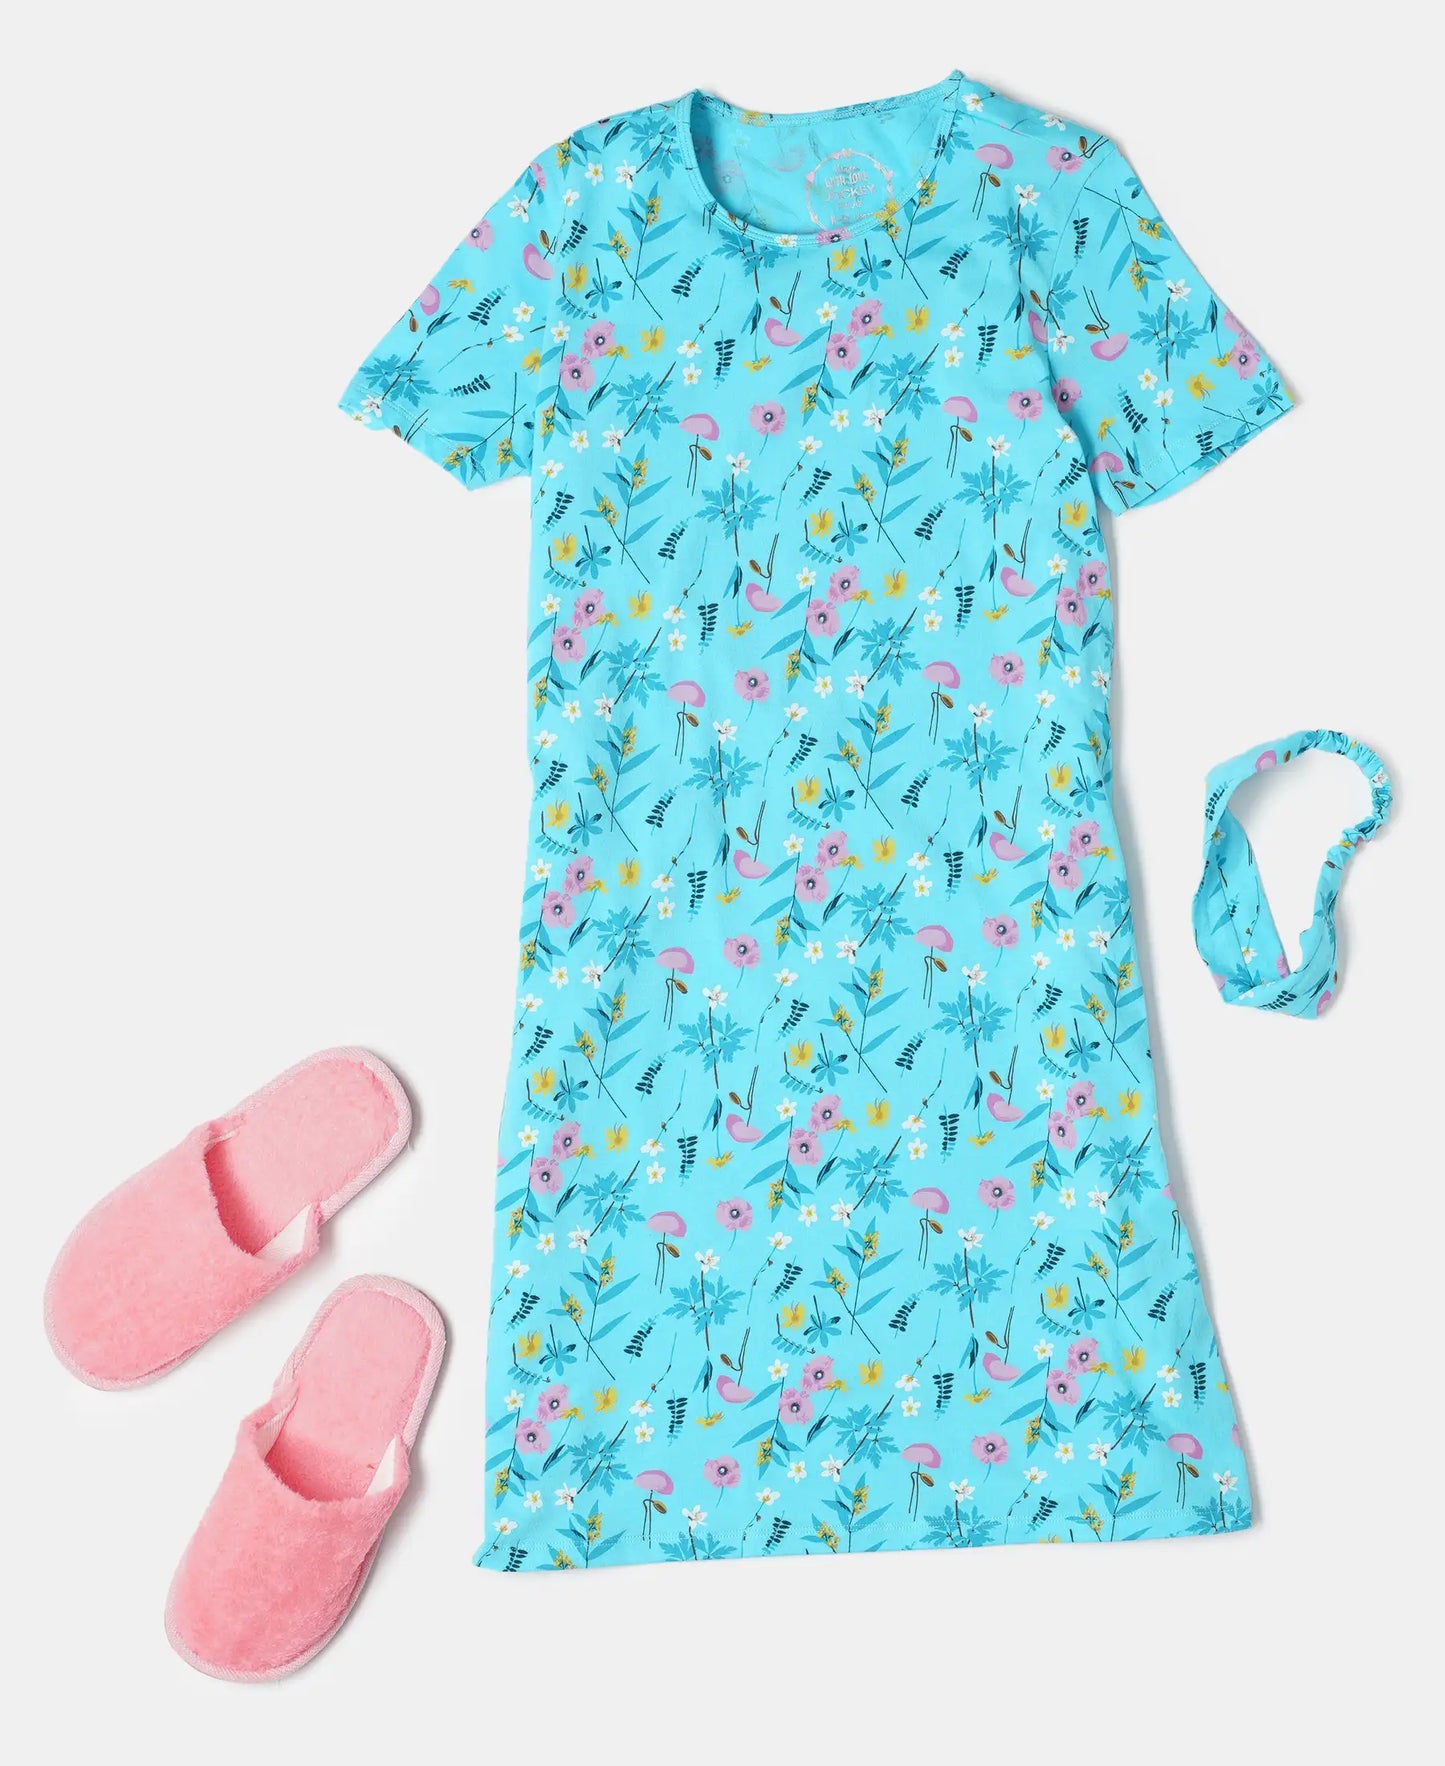 Girl's Super Combed Cotton Printed Dress with Matching Headband - Assorted